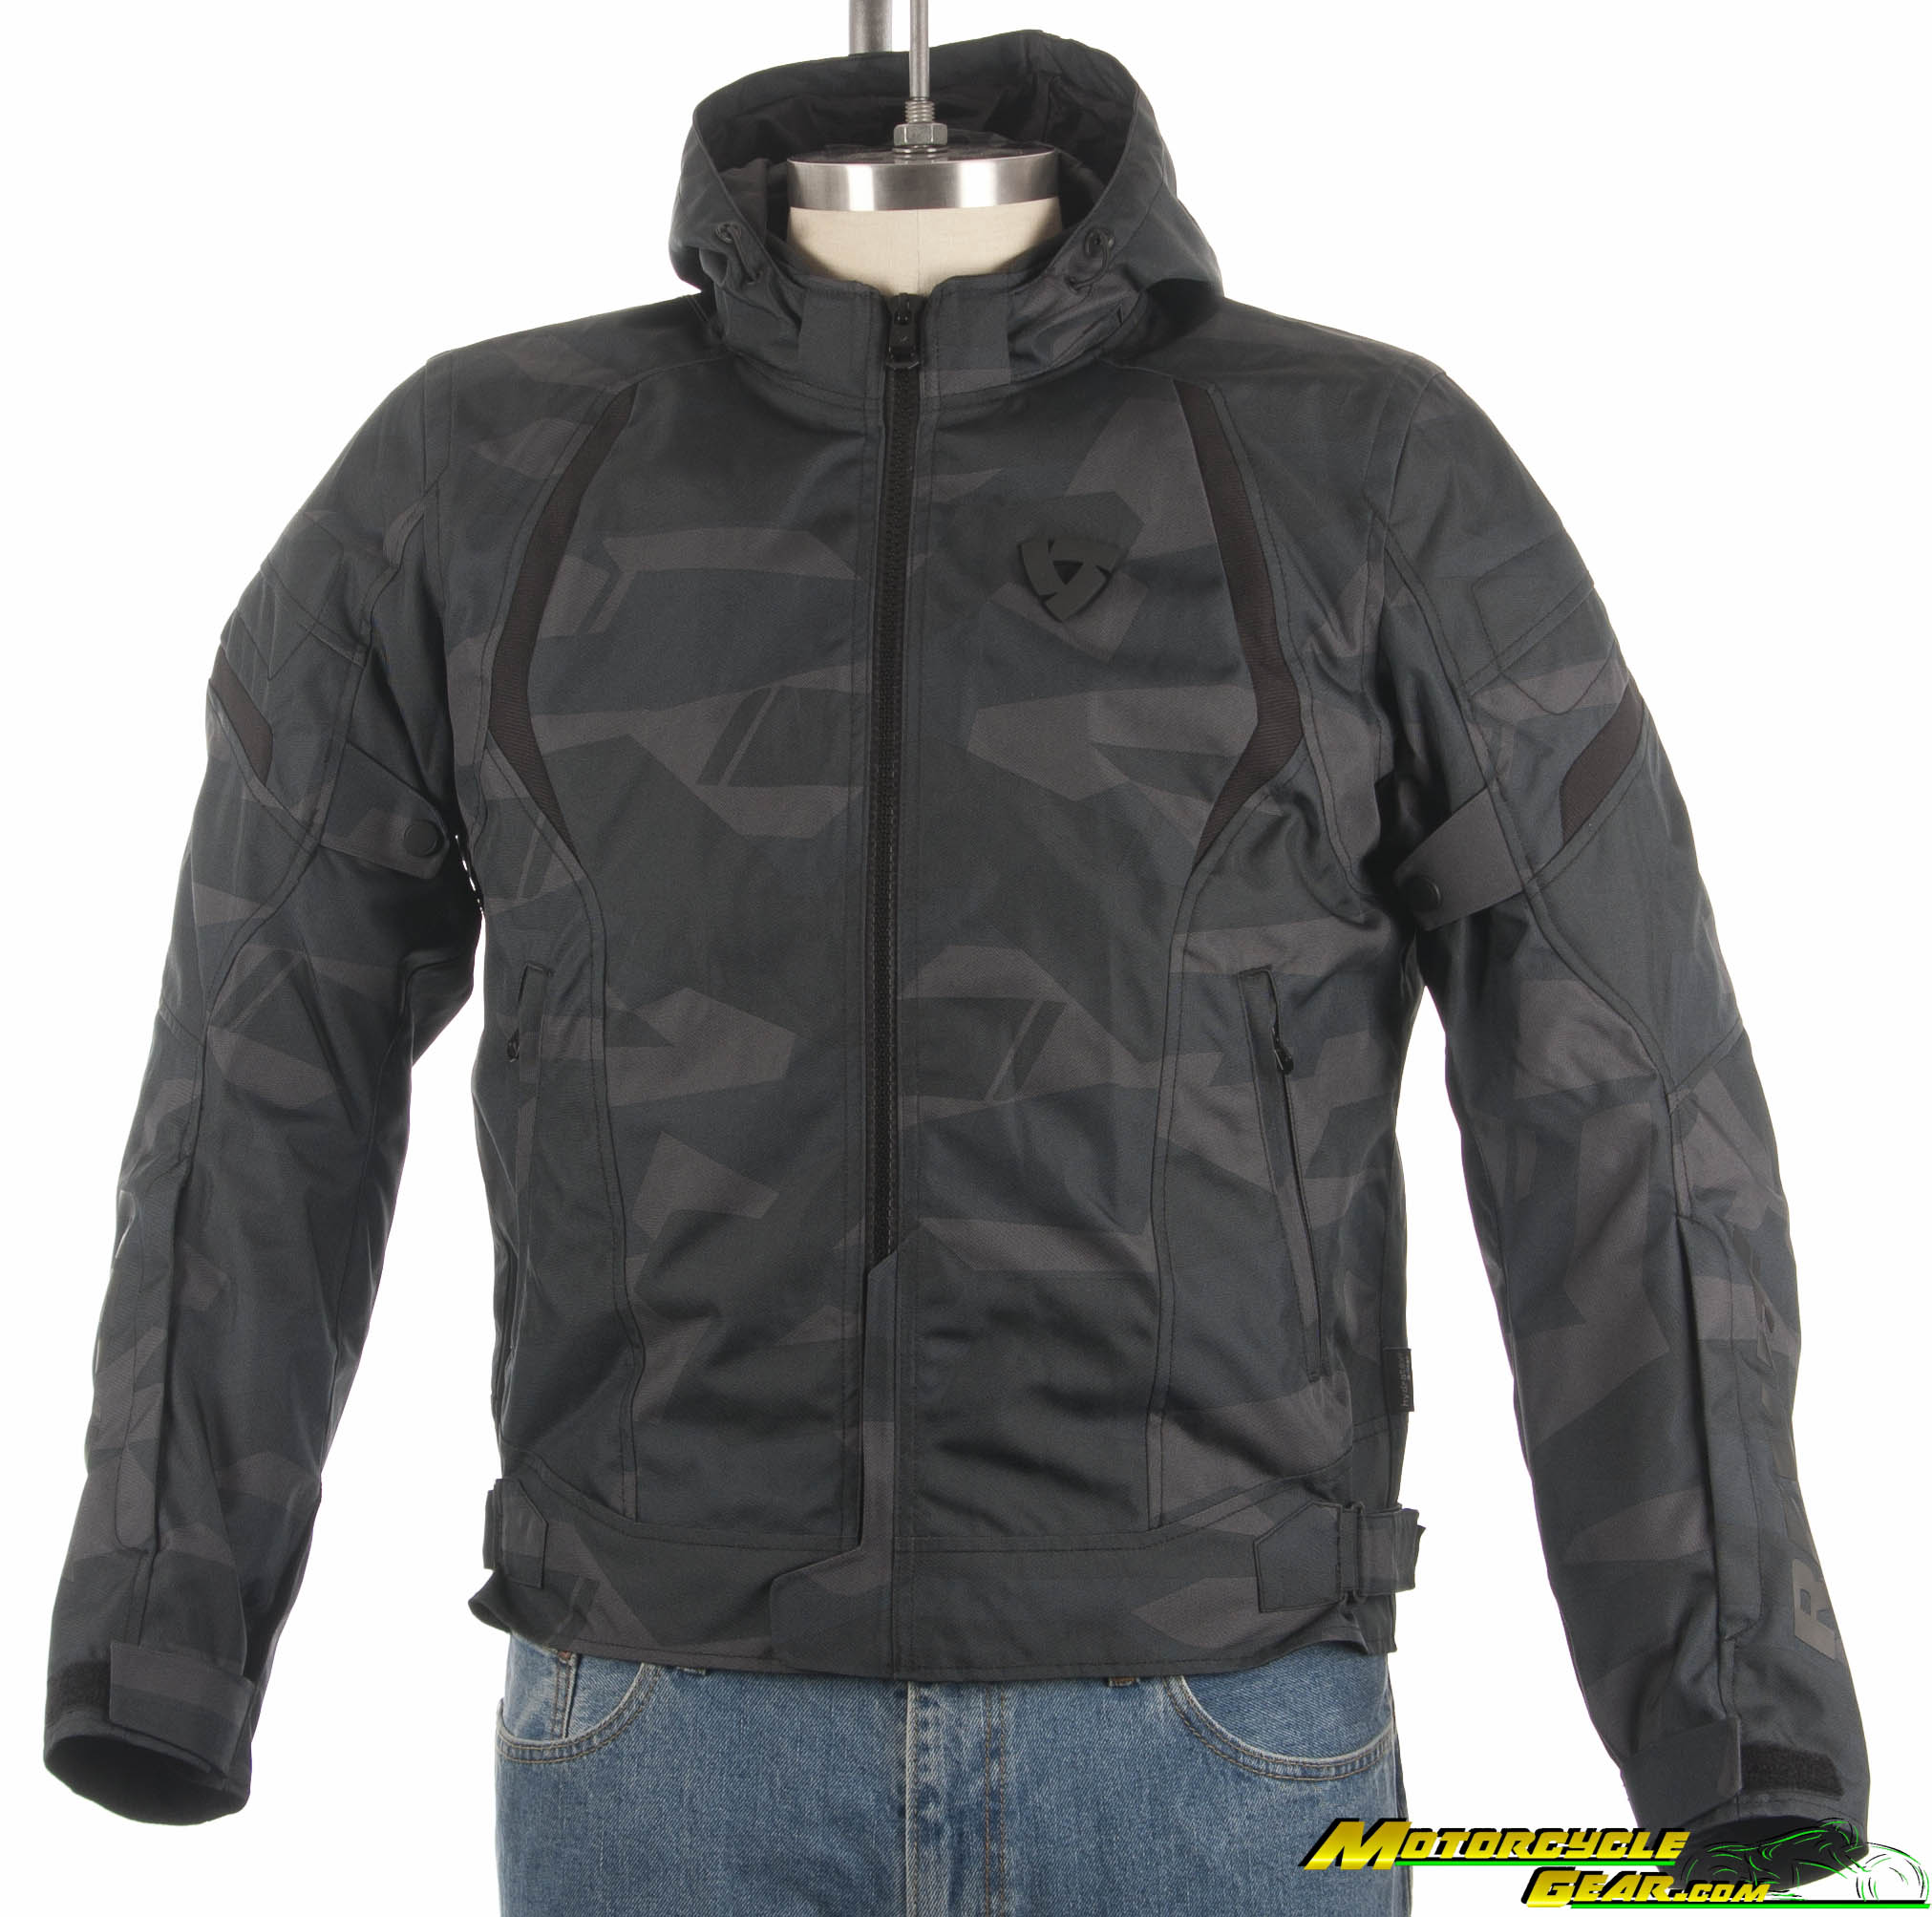 Viewing Images For REV'IT! Flare 2 Jacket :: MotorcycleGear.com